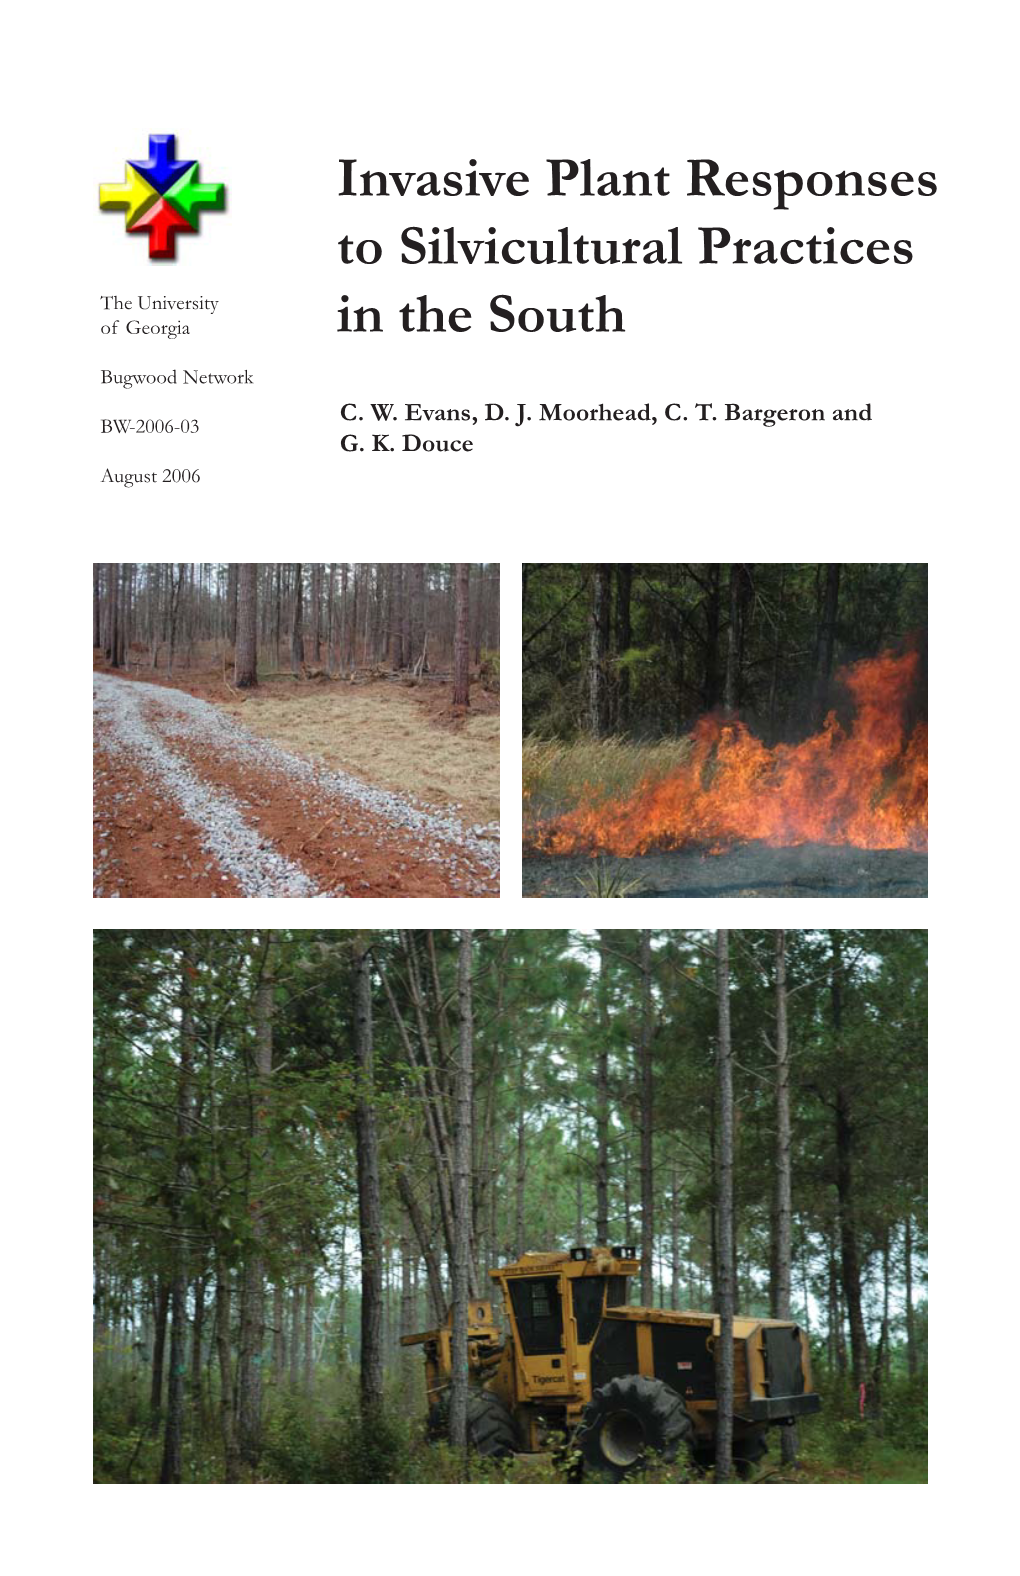 Invasive Plant Responses to Silvicultural Practices in the South